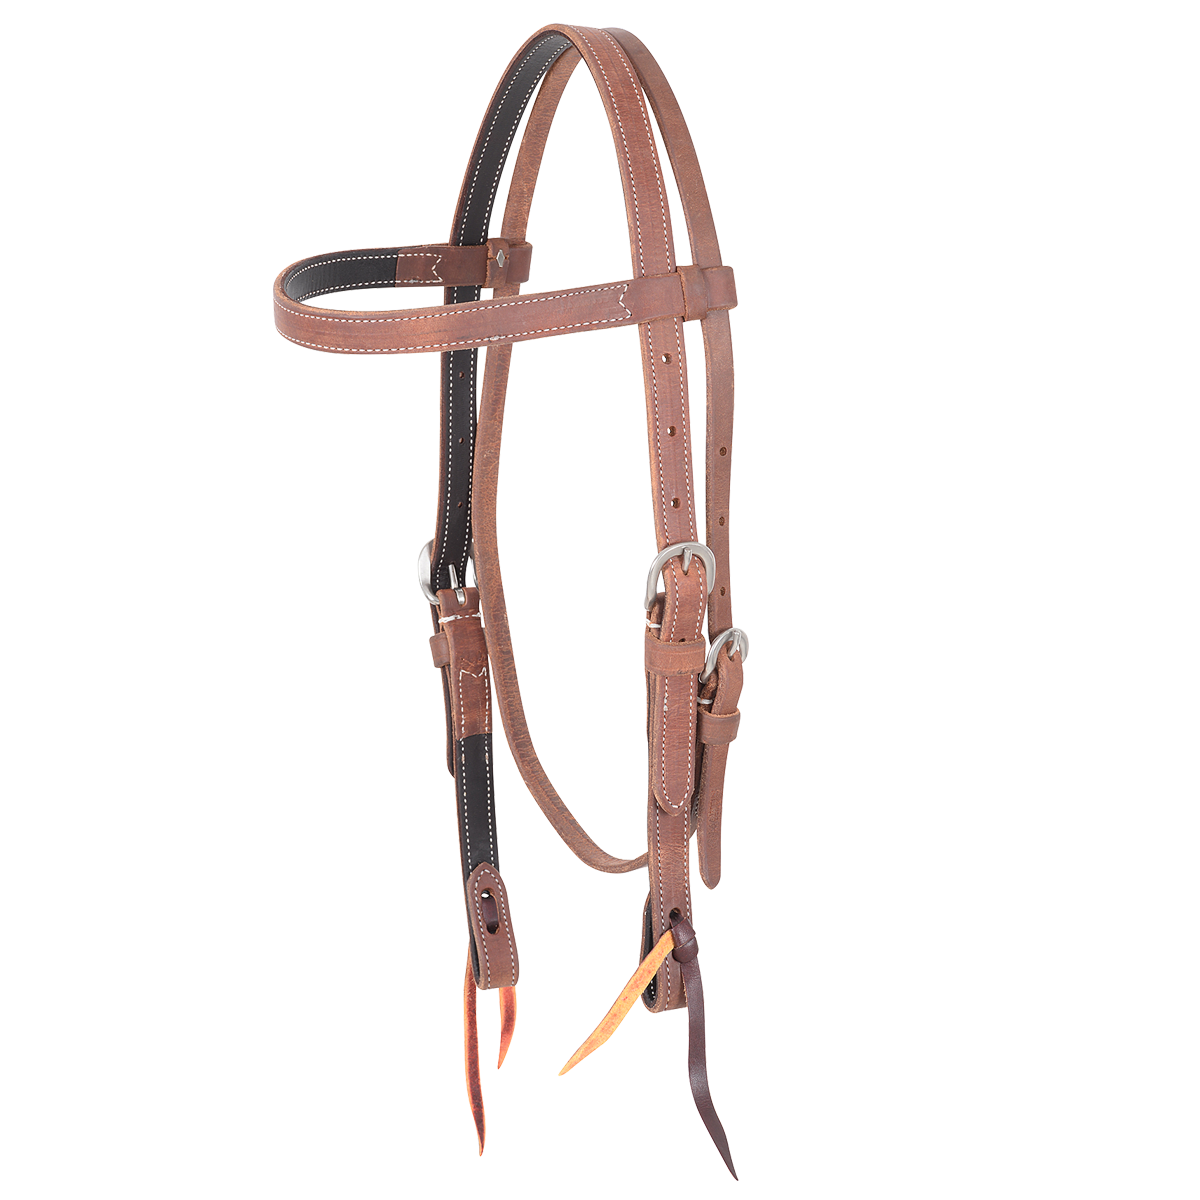 Martin Saddlery Doubled and Stitched Harness Browband Headstall